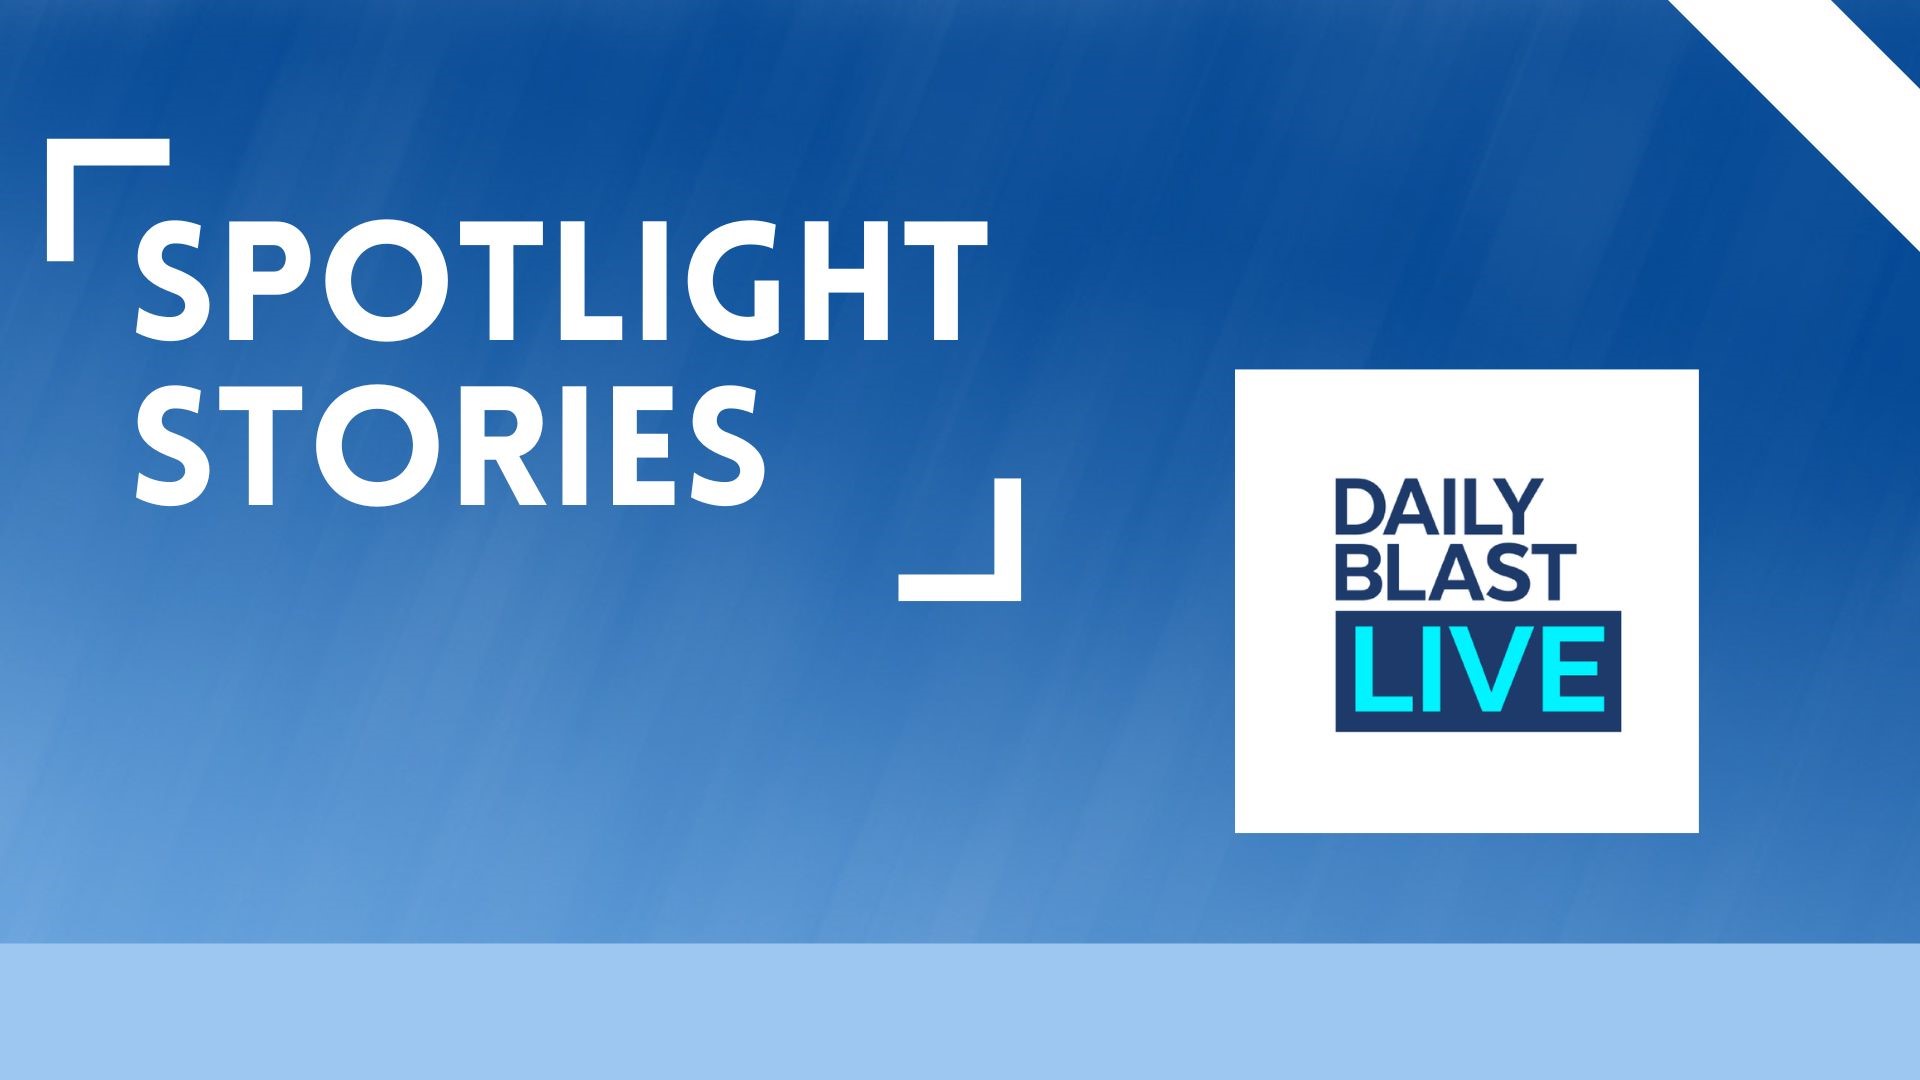 A collection of the top 5 spotlight stories from Daily Blast Live; including a convict turned TikTok star and a man making chess fun for kids in Compton